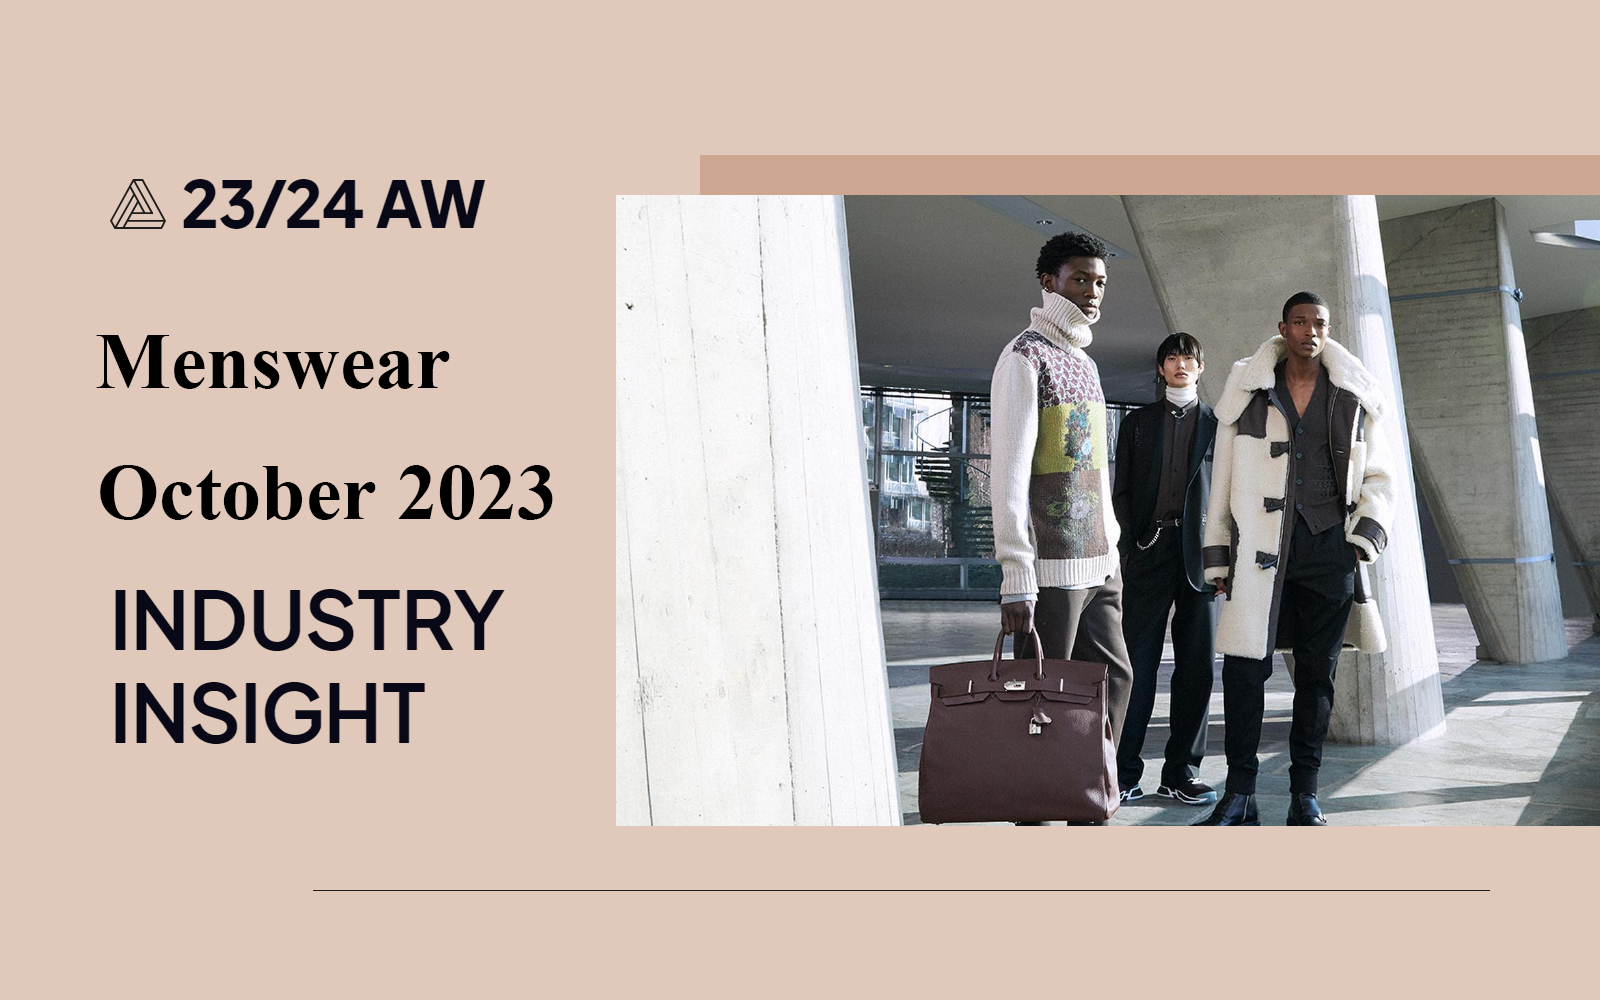 October 2023 -- The Industry Insight of Menswear